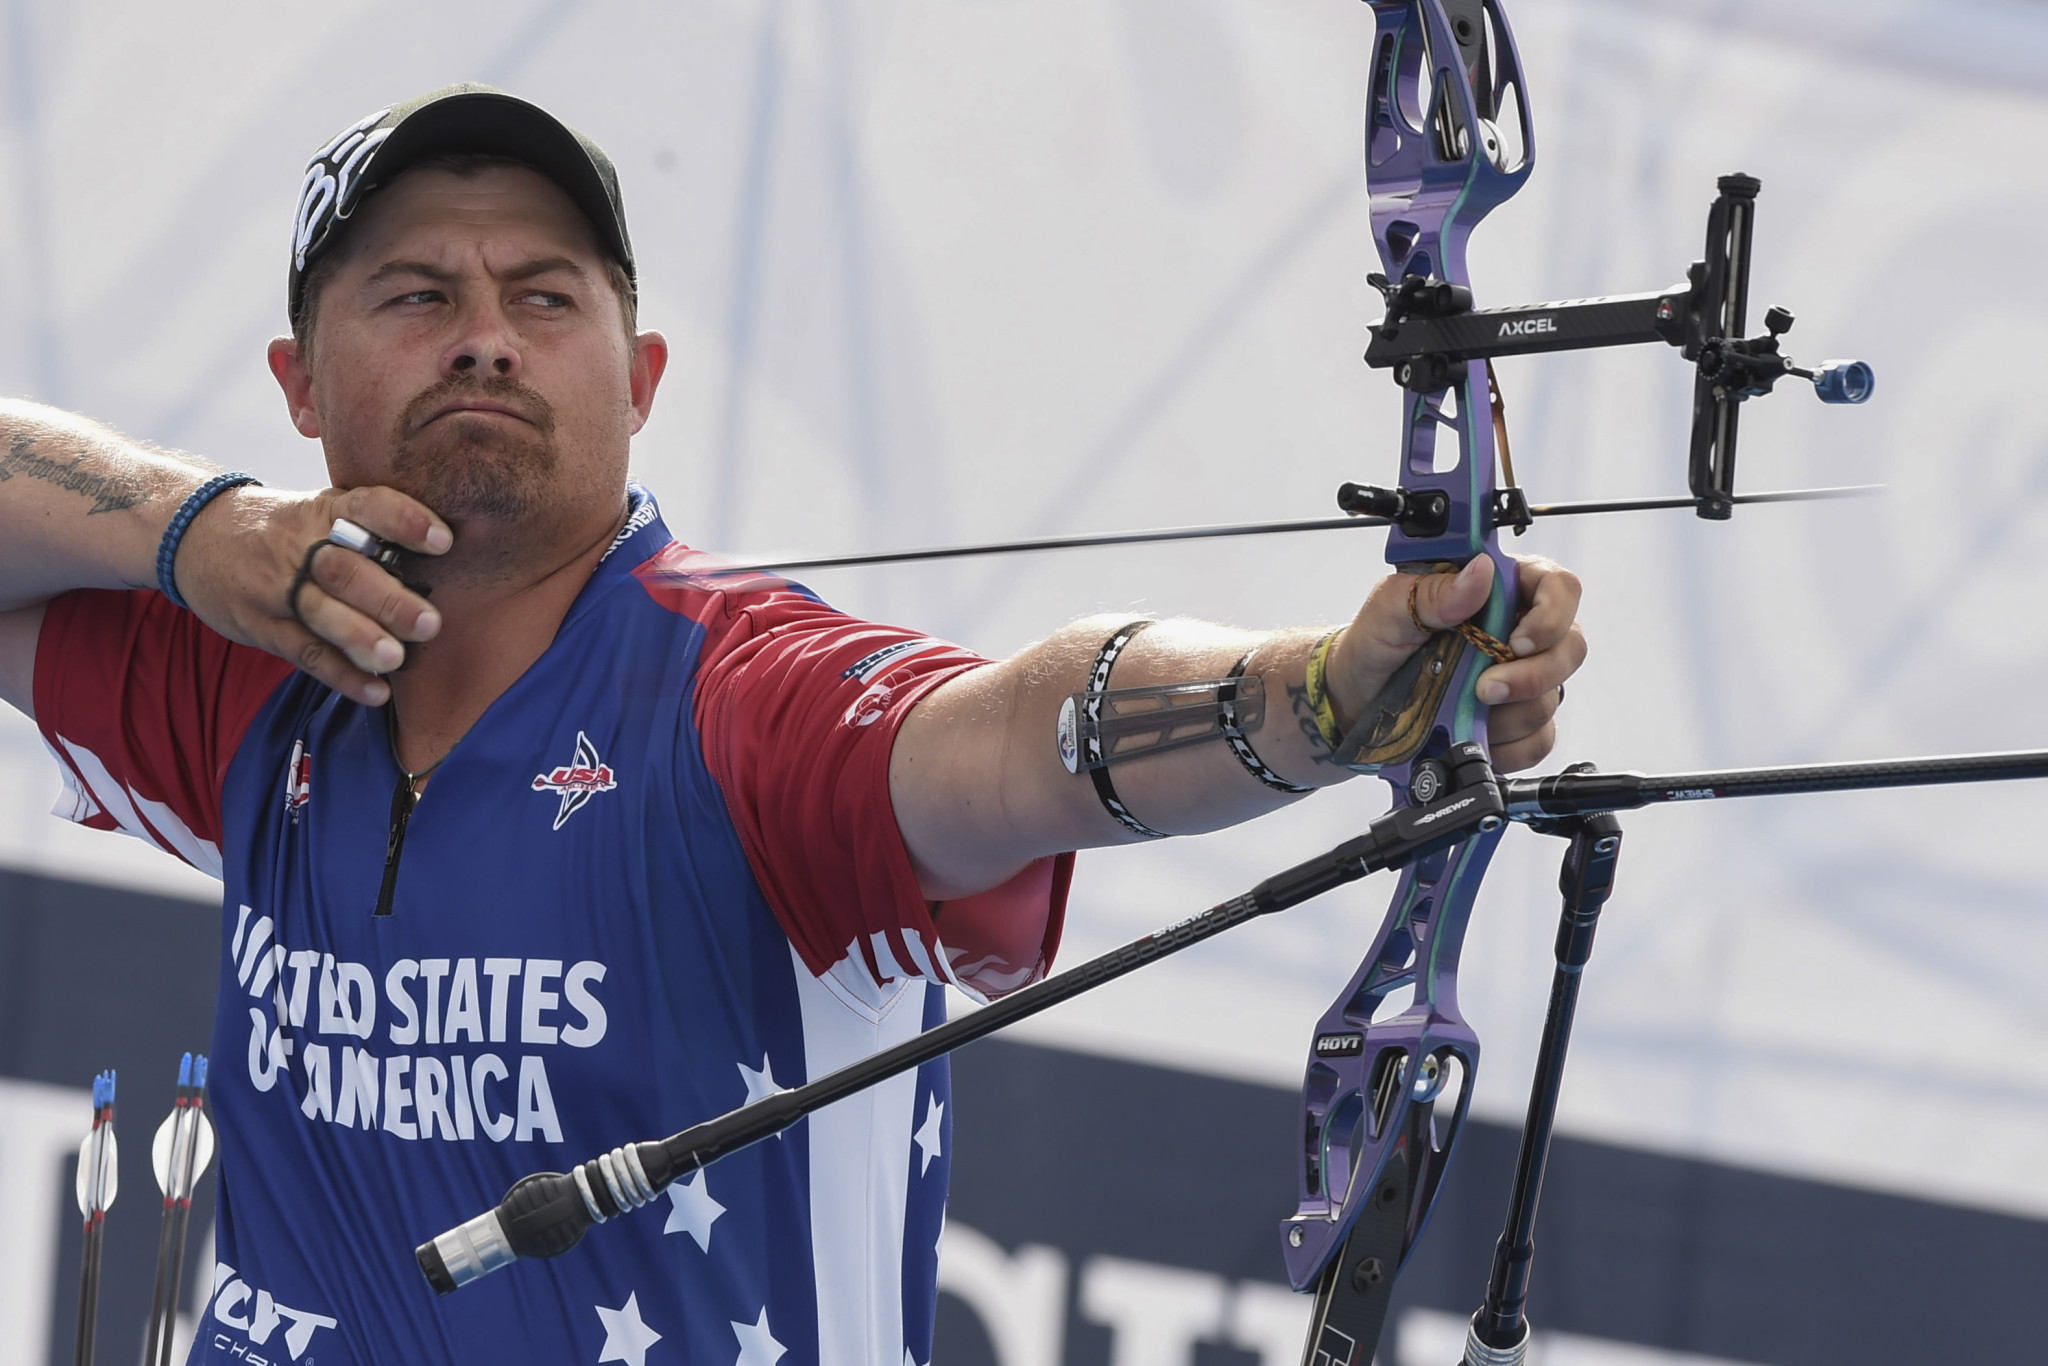 Tactics to the fore as Shanghai prepares for second stage of Hyundai World Archery Cup